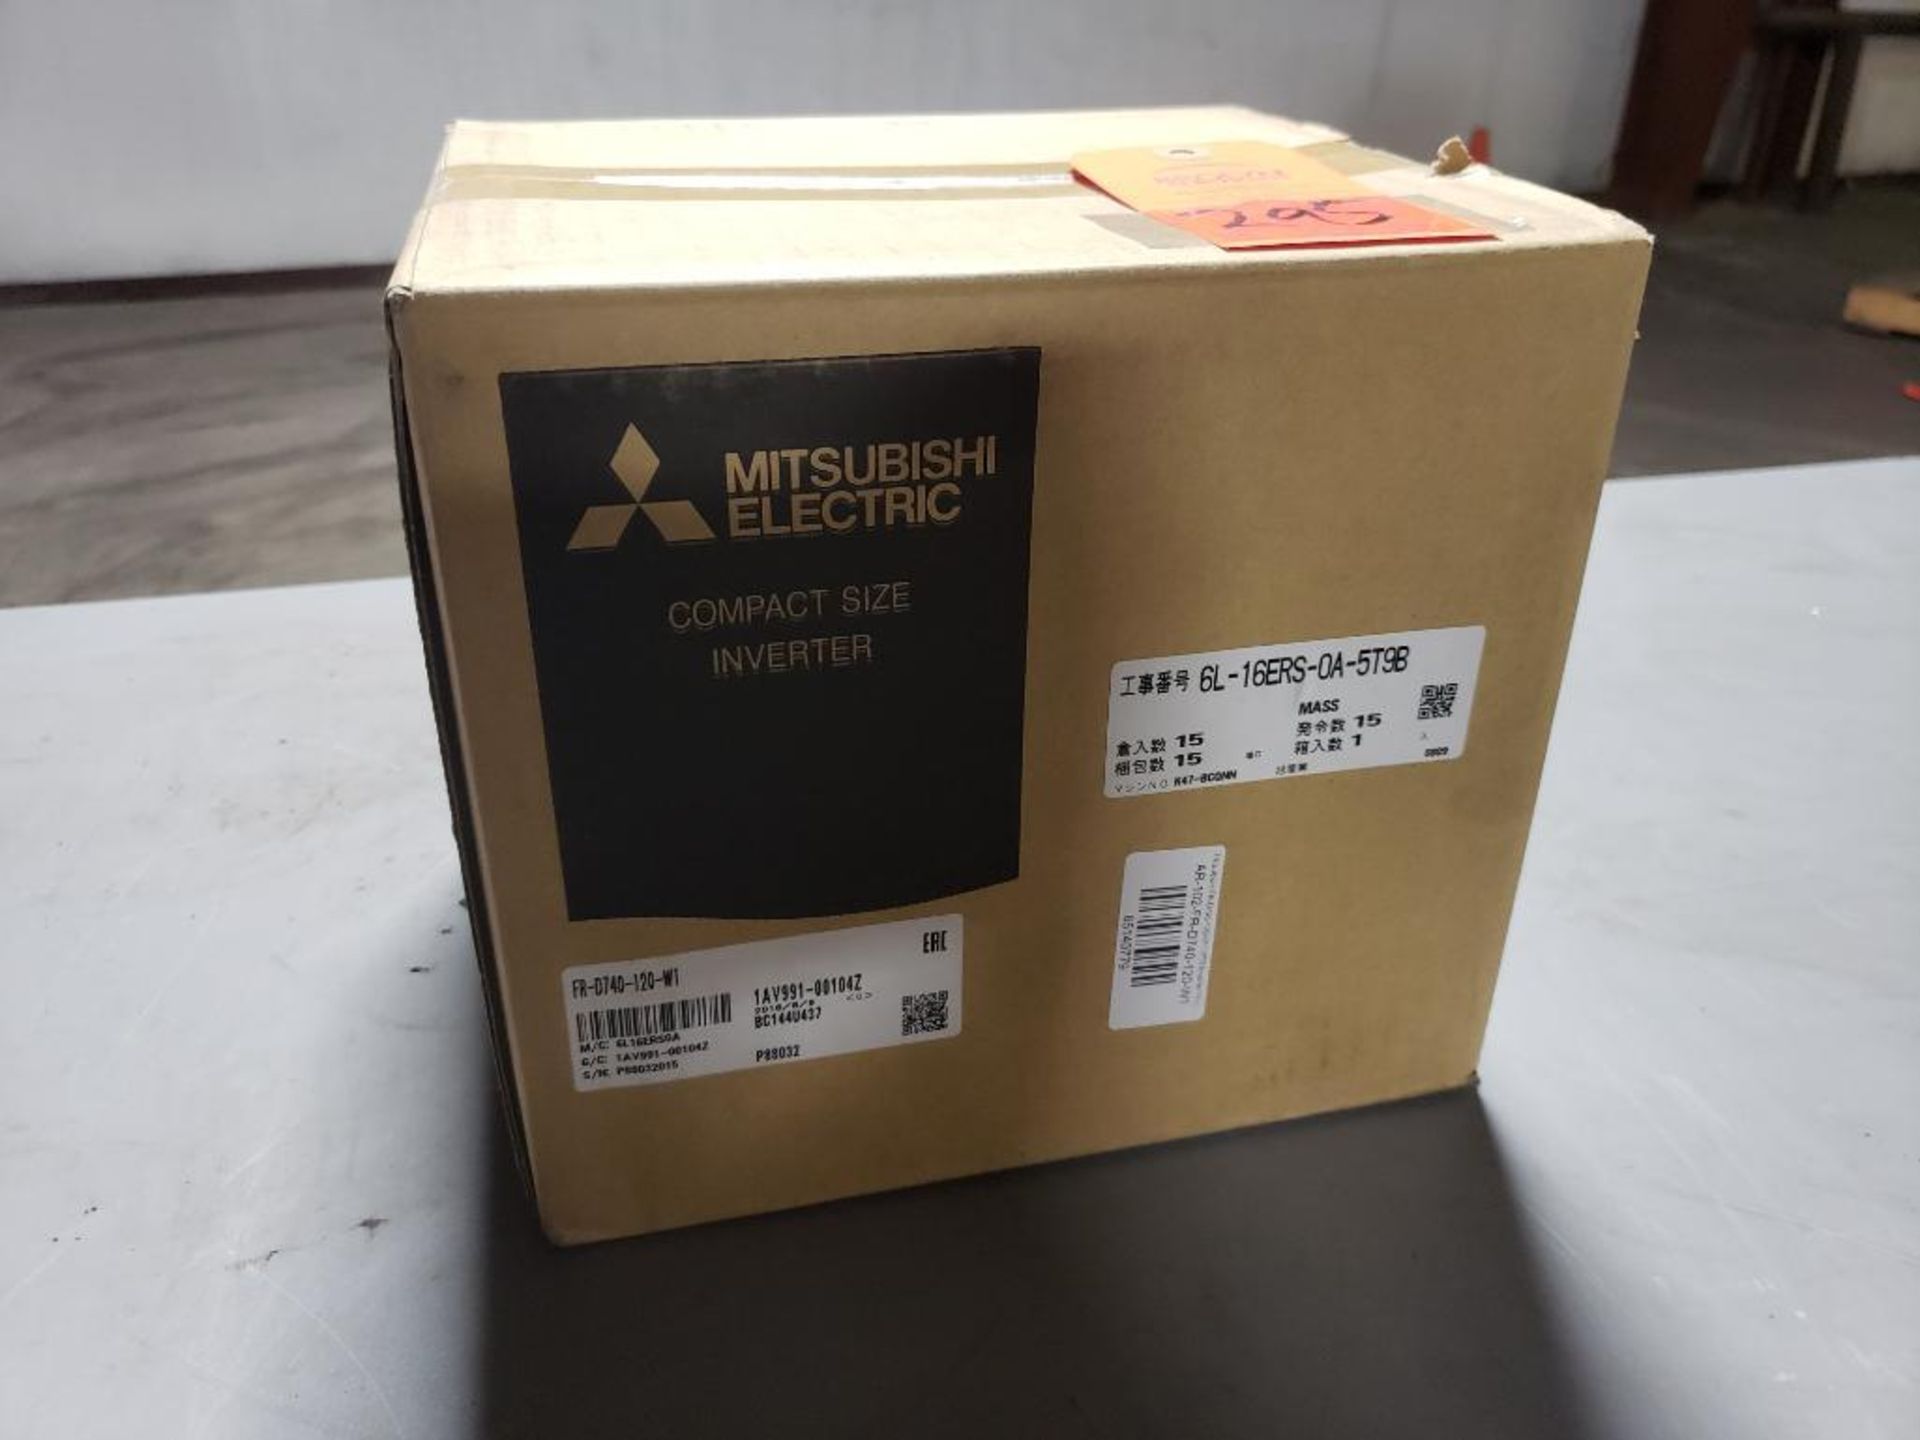 Mitsubishi inverter drive. Part number FR-D740-120-W1. New in box.